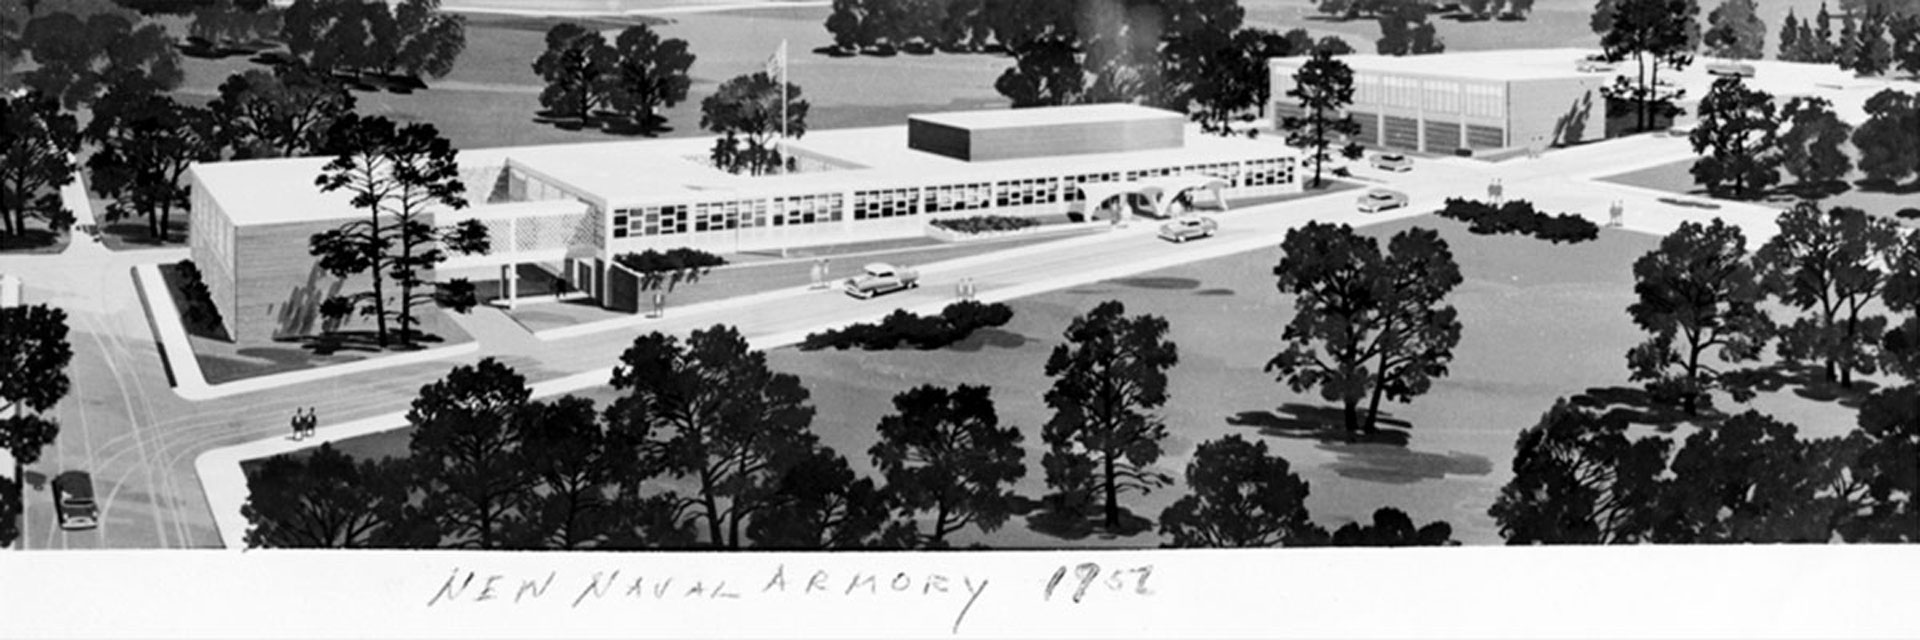 1952 photo of naval armory.